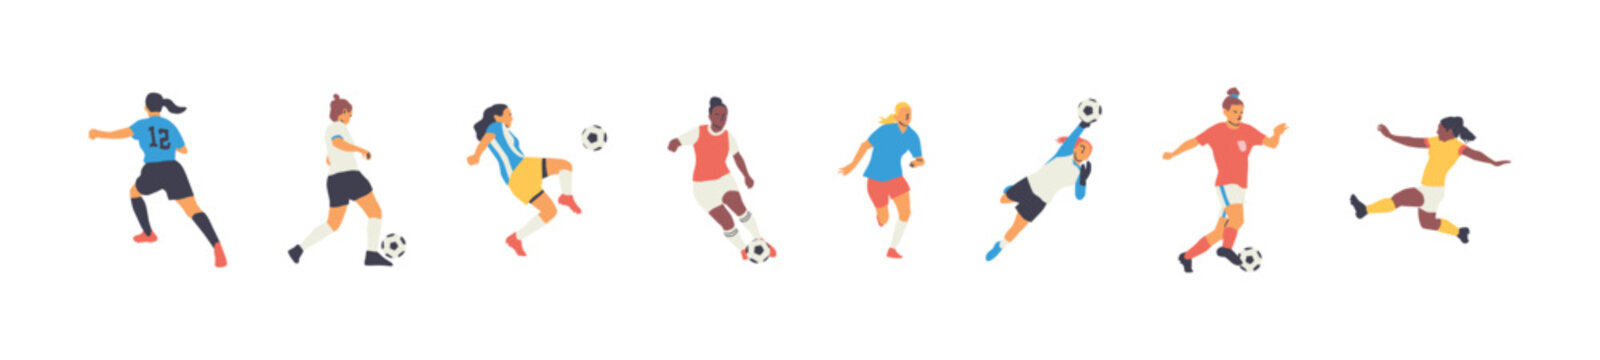 Diverse all women soccer player  team people set. Colorful retro style female athlete playing football game on isolated background. Woman tournament match collection, sport illustration. 